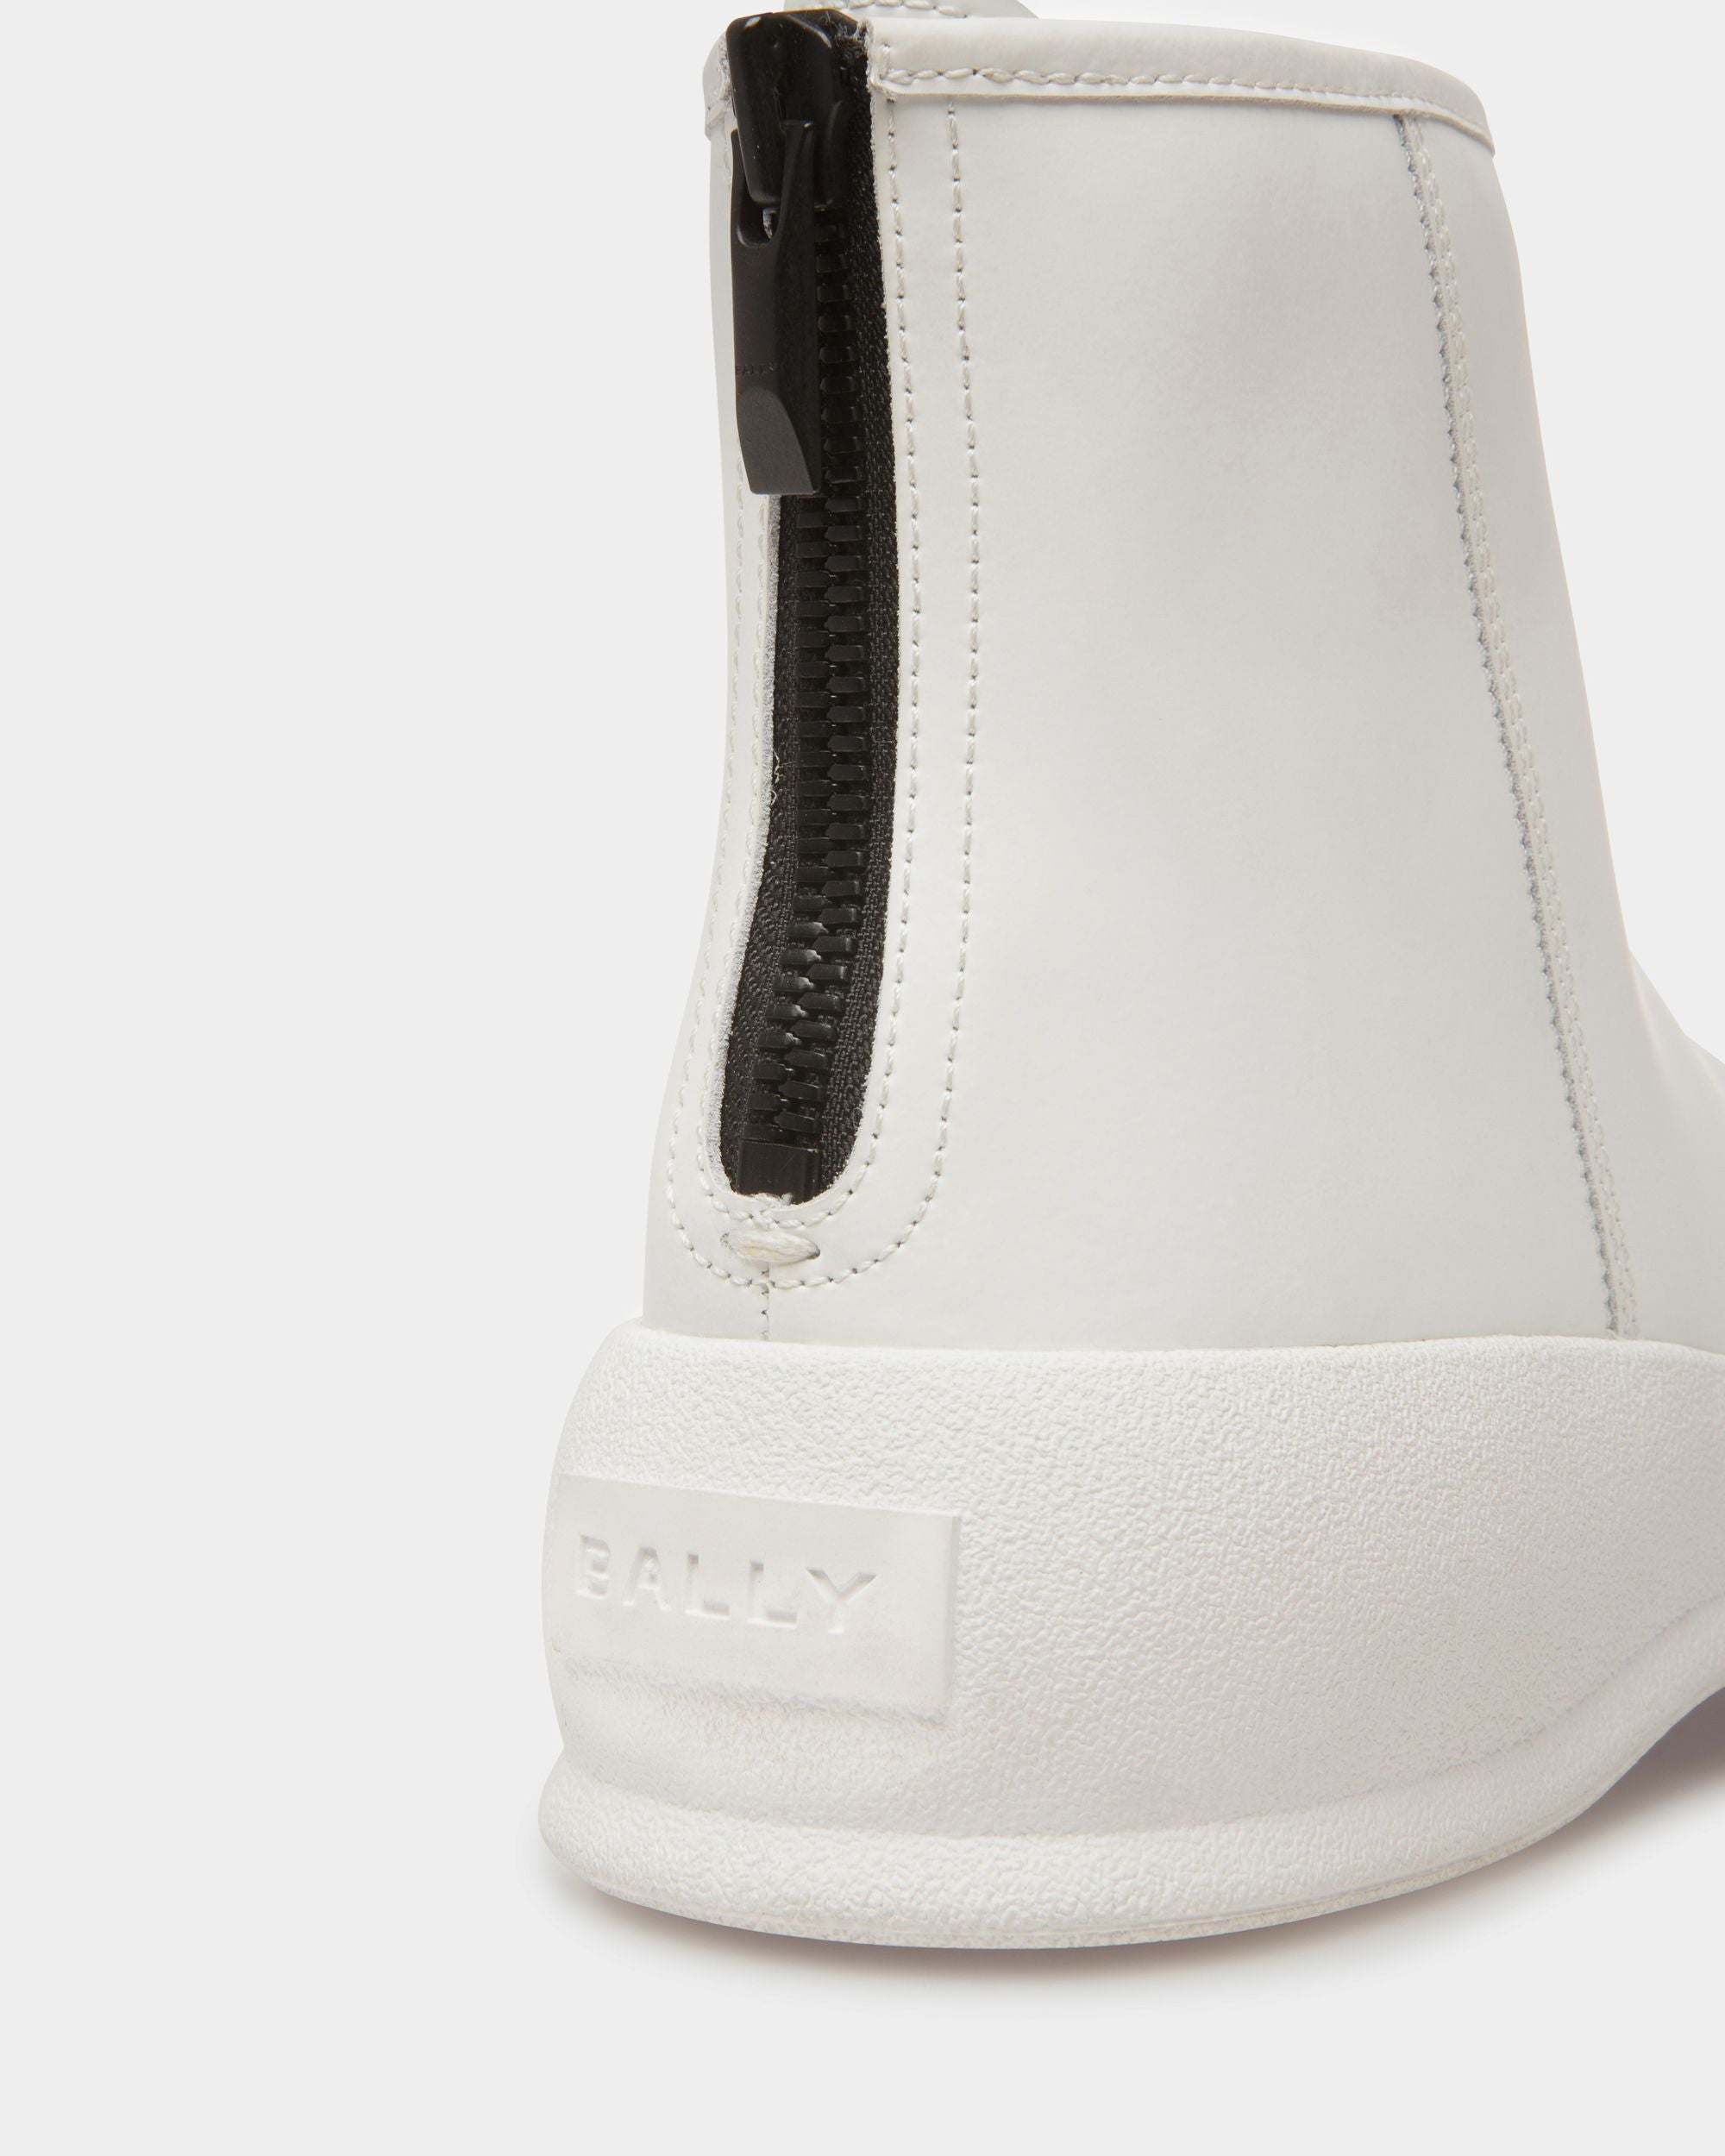 Carsey | Women's Booties | White Rubber-coated Leather | Bally | Still Life Detail